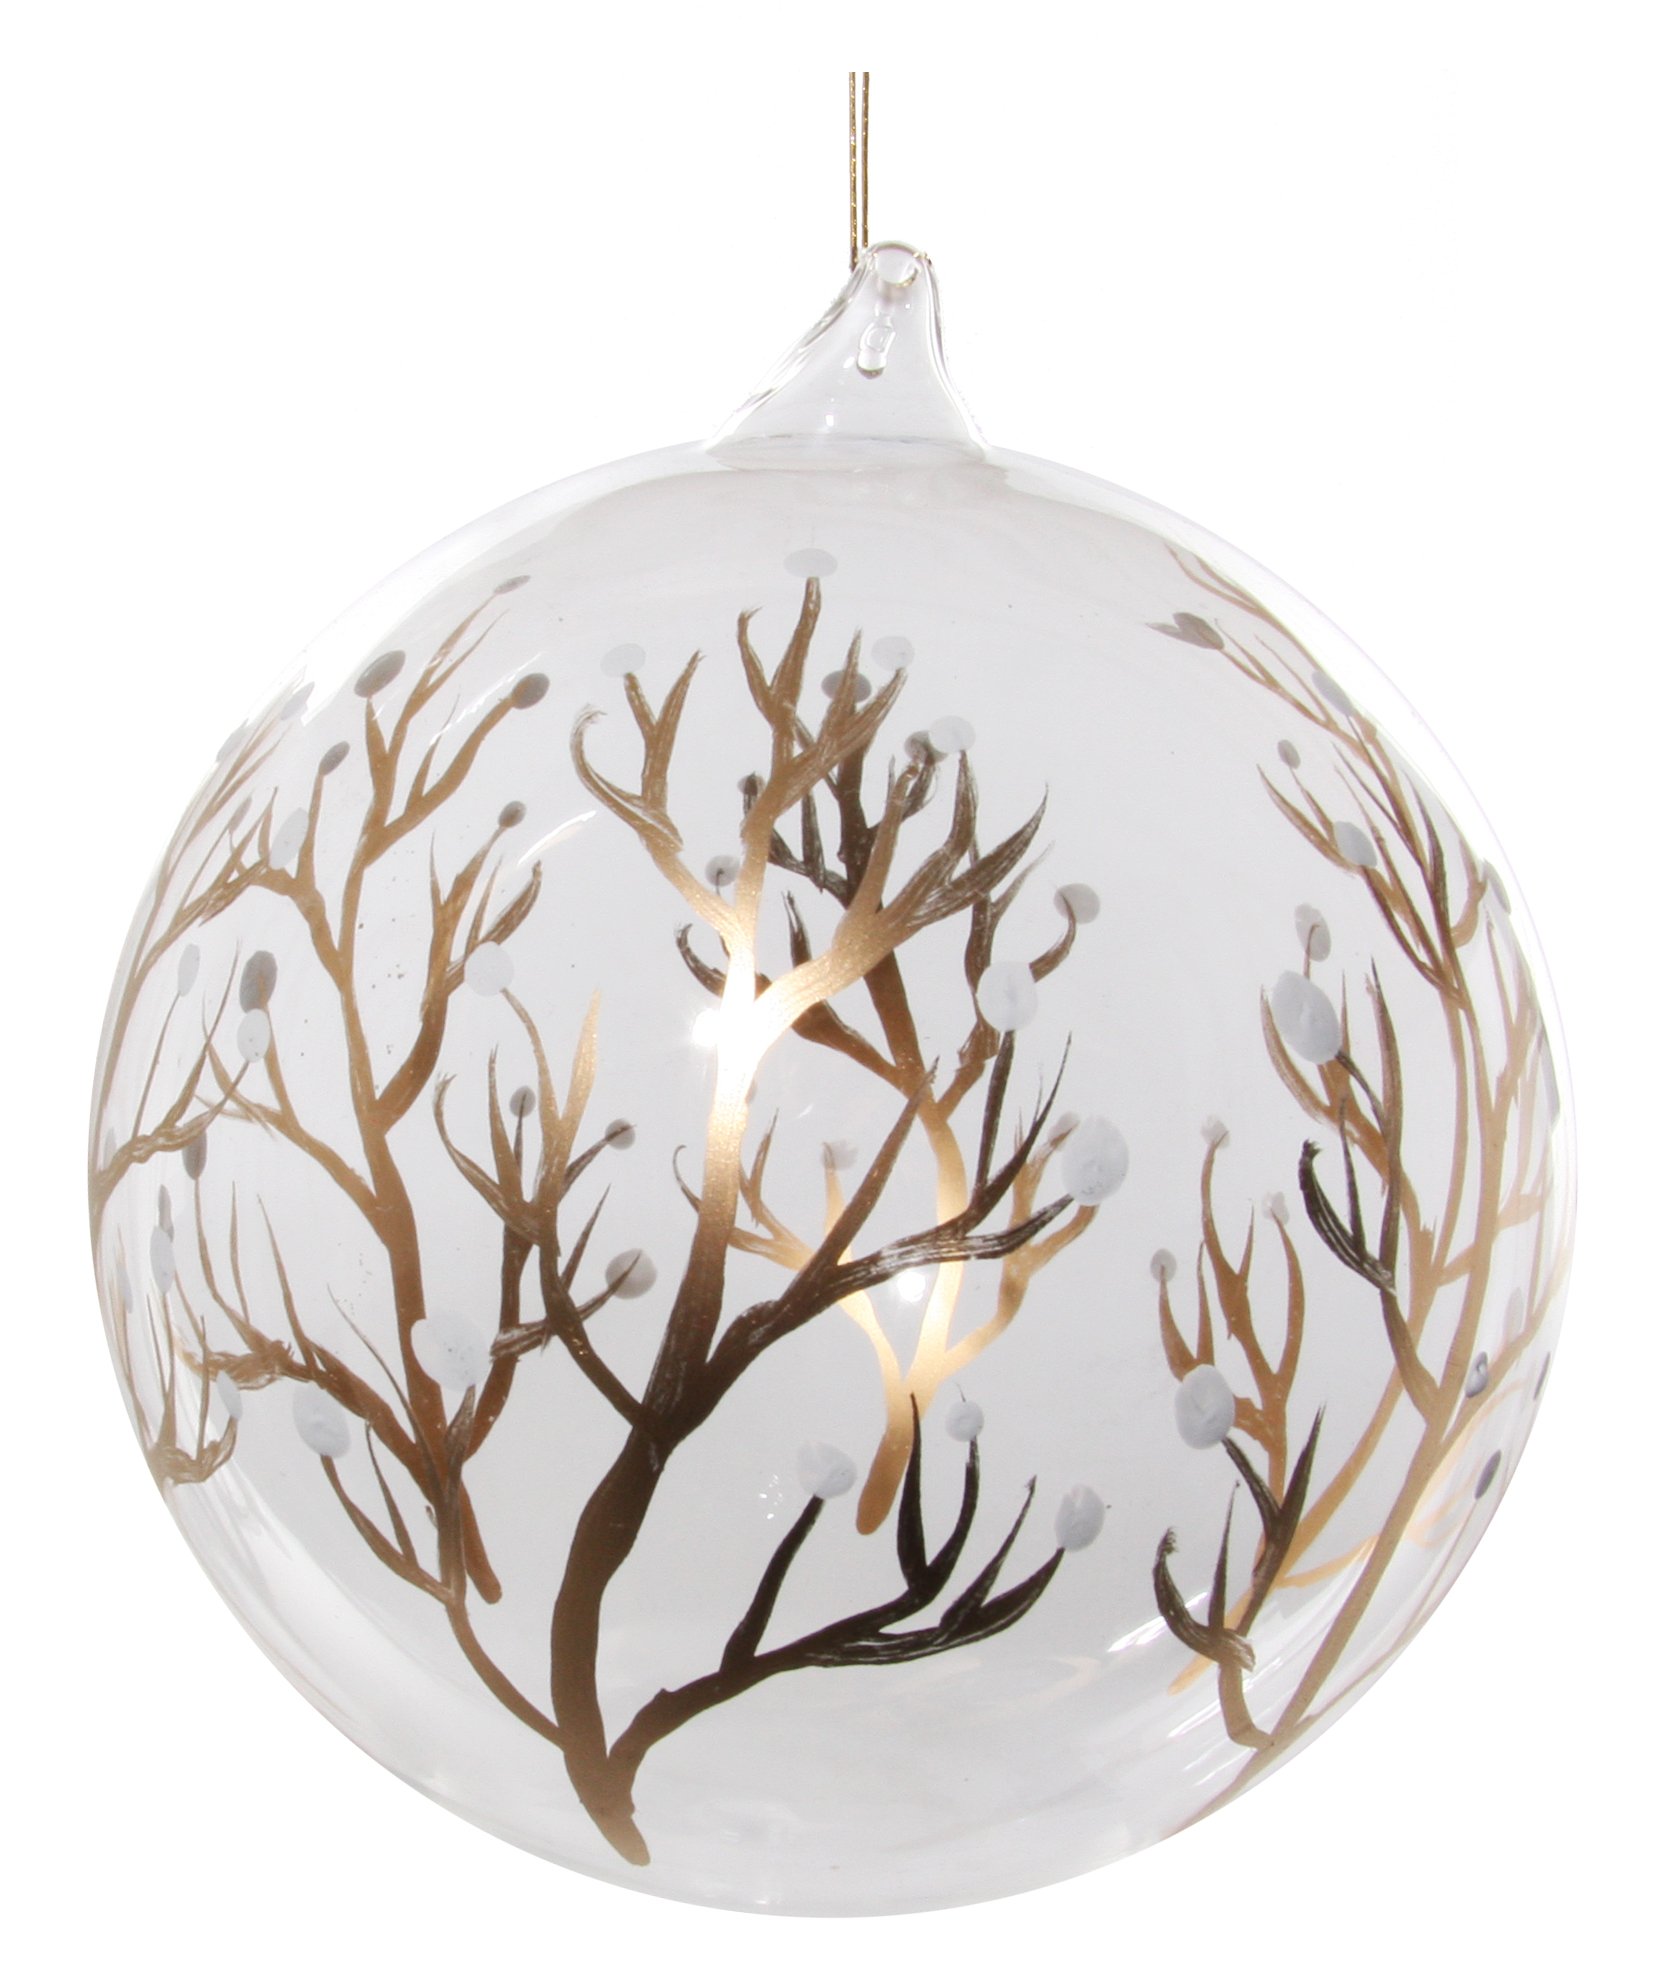 shishi-clear-glass-ball-wgold-painted-trees-12cm